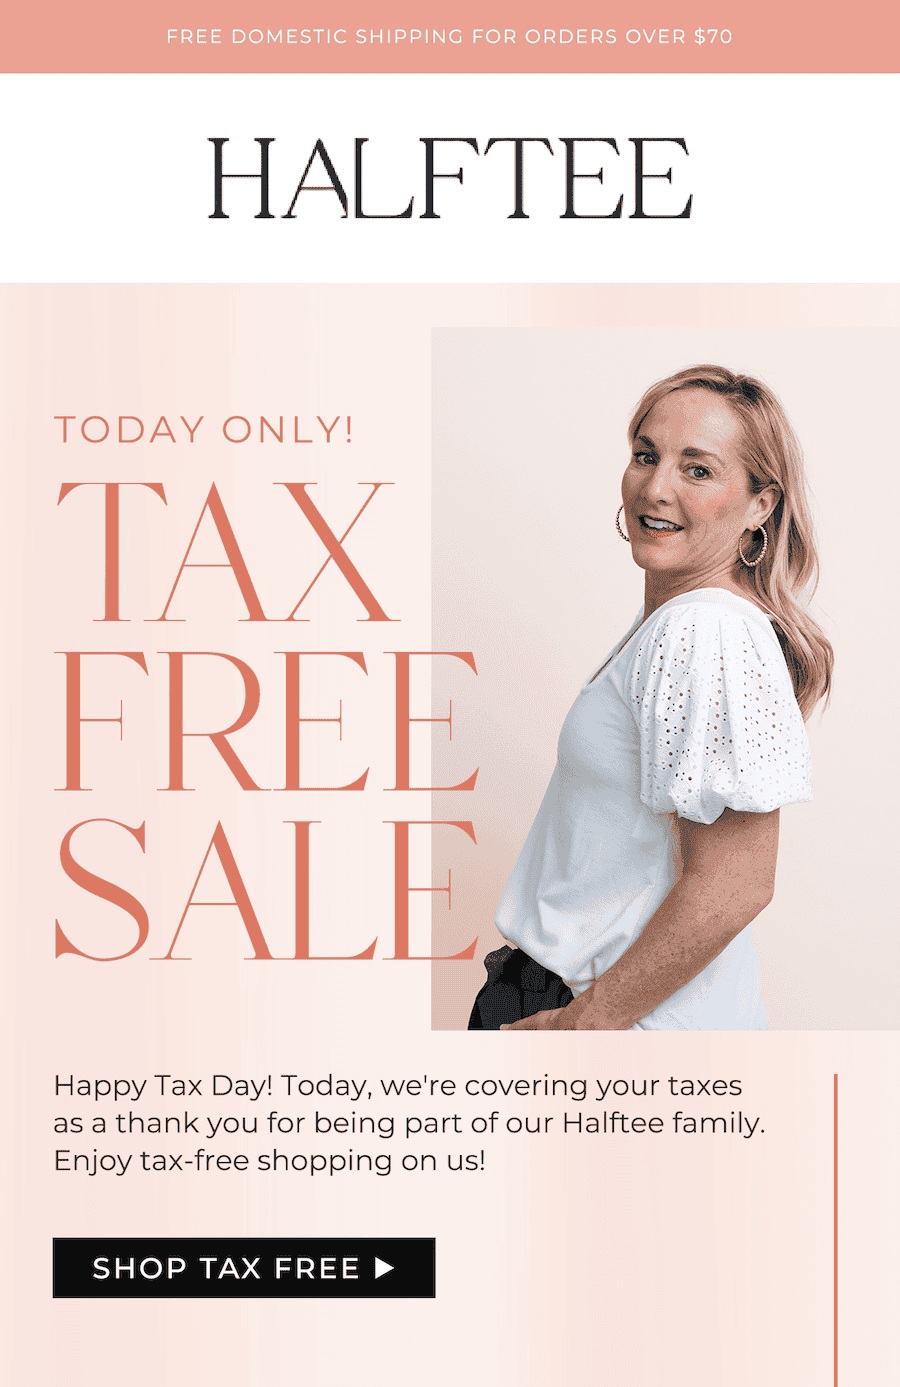 TODAY ONLY TAX FREE SALE Happy Tax Day! Today, we're covering your taxes as a thank-you for being part of our Halftee family. Enjoy tax-free shopping on us!